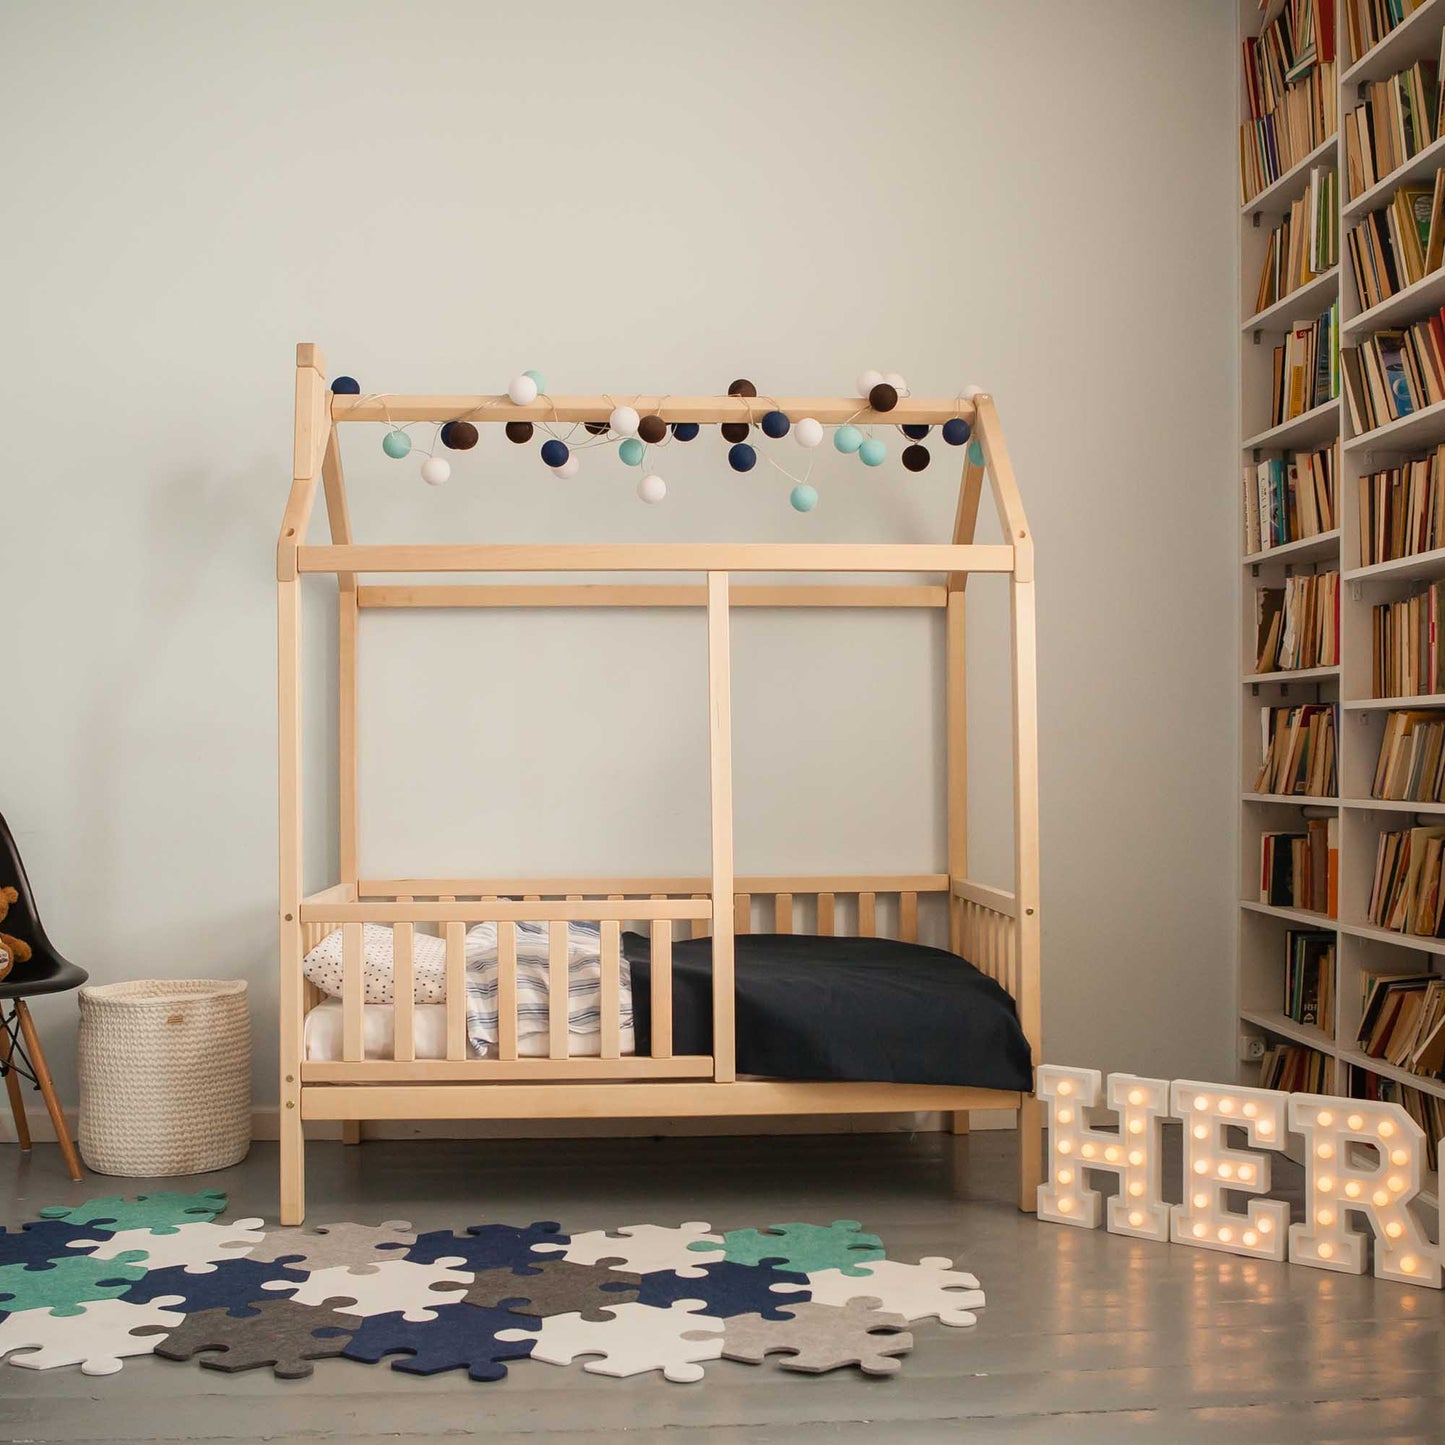 A toddler's bedroom with a kids' house bed on legs with a fence and bookshelves.